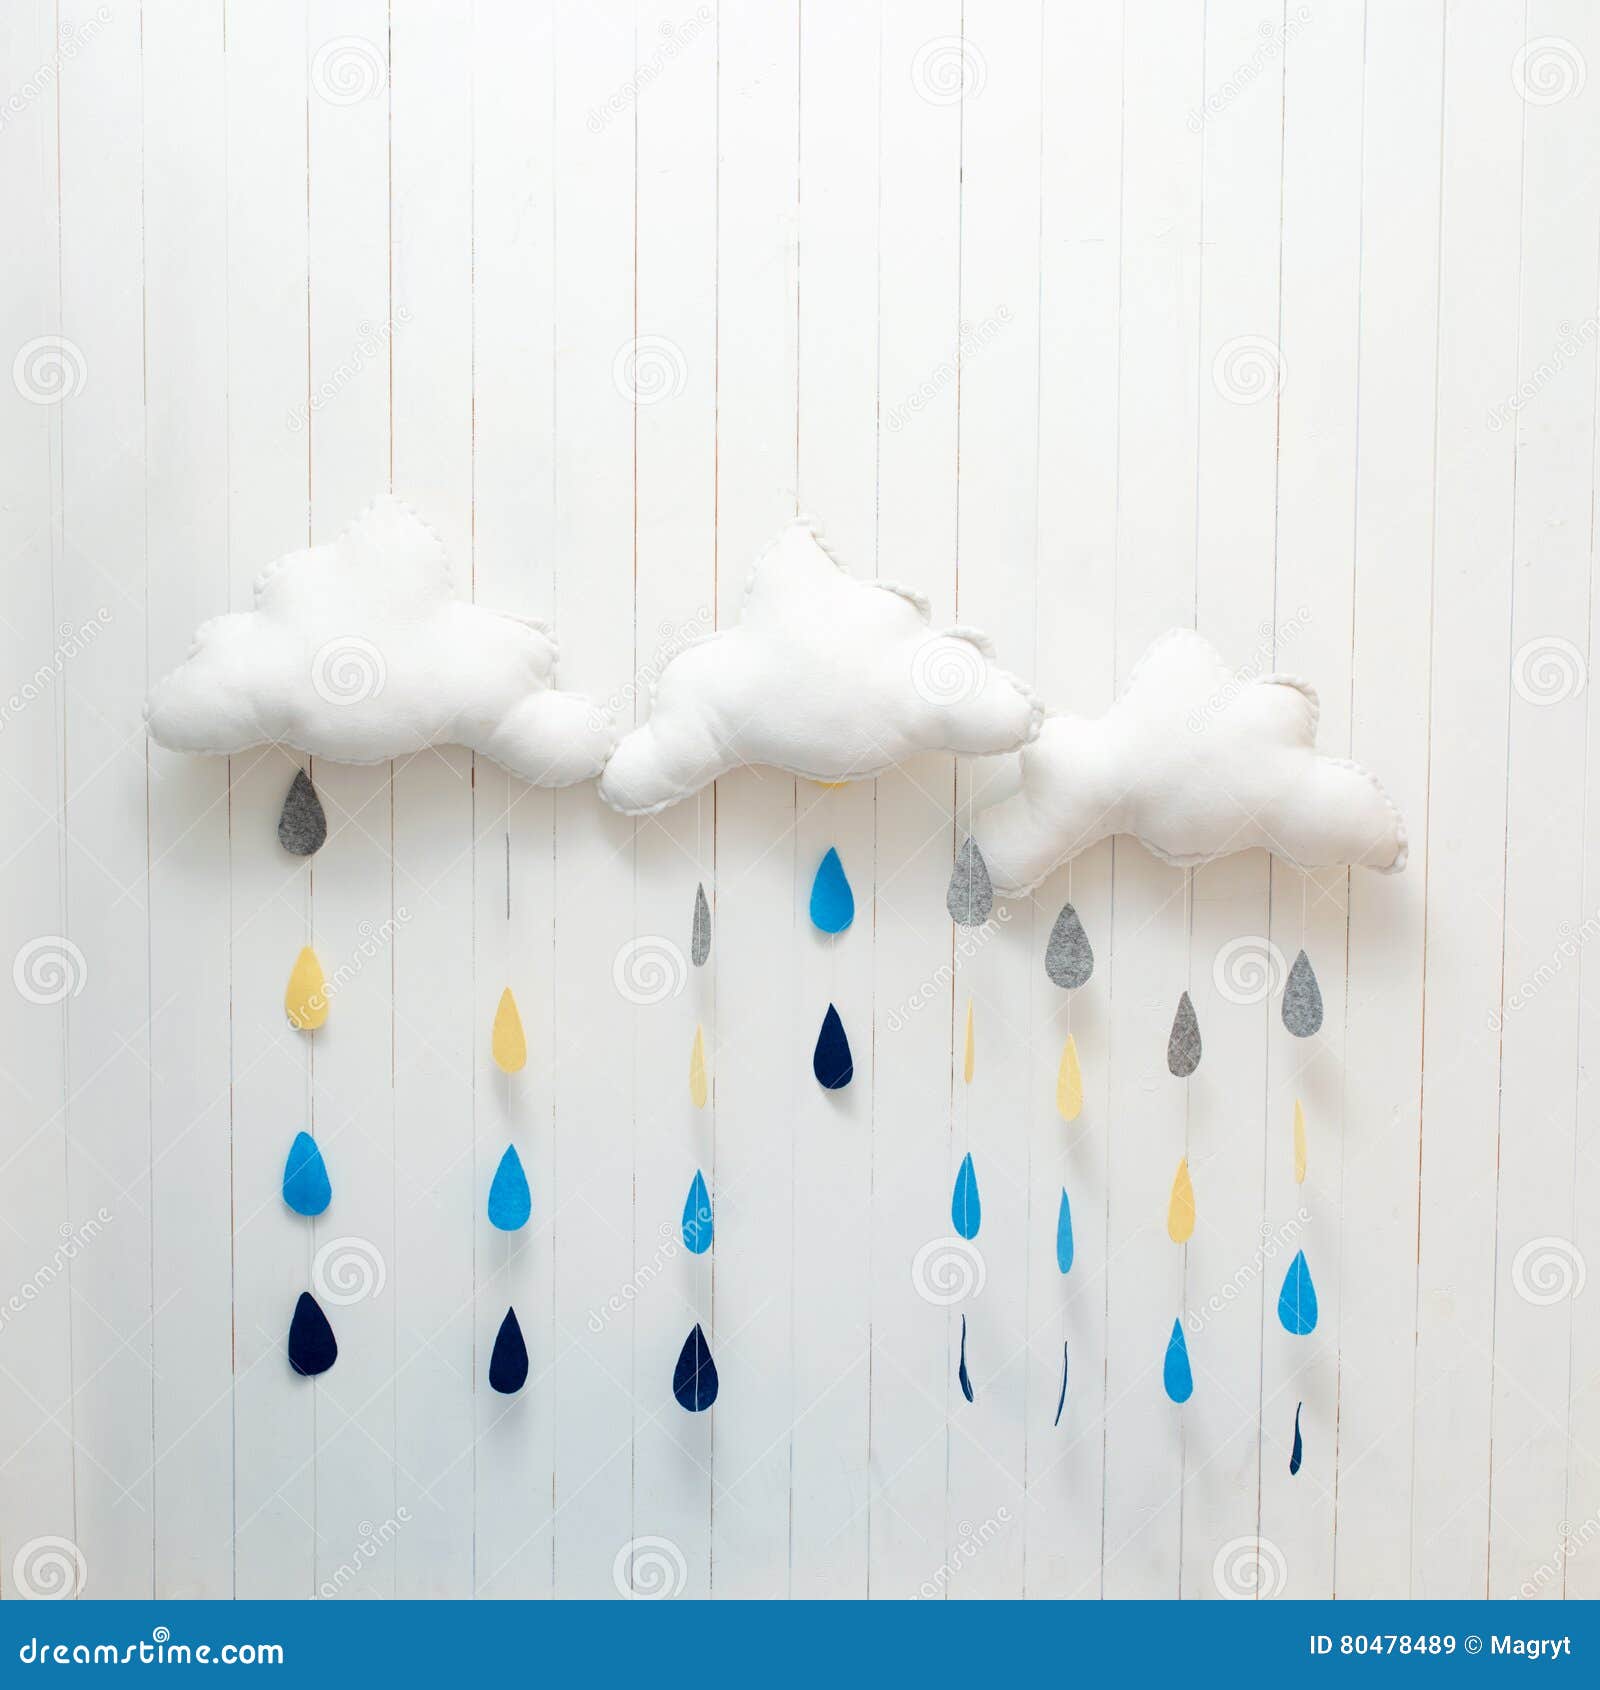 Weather Symbols. Handmade Room Decoration Clouds with Rain Drops ...